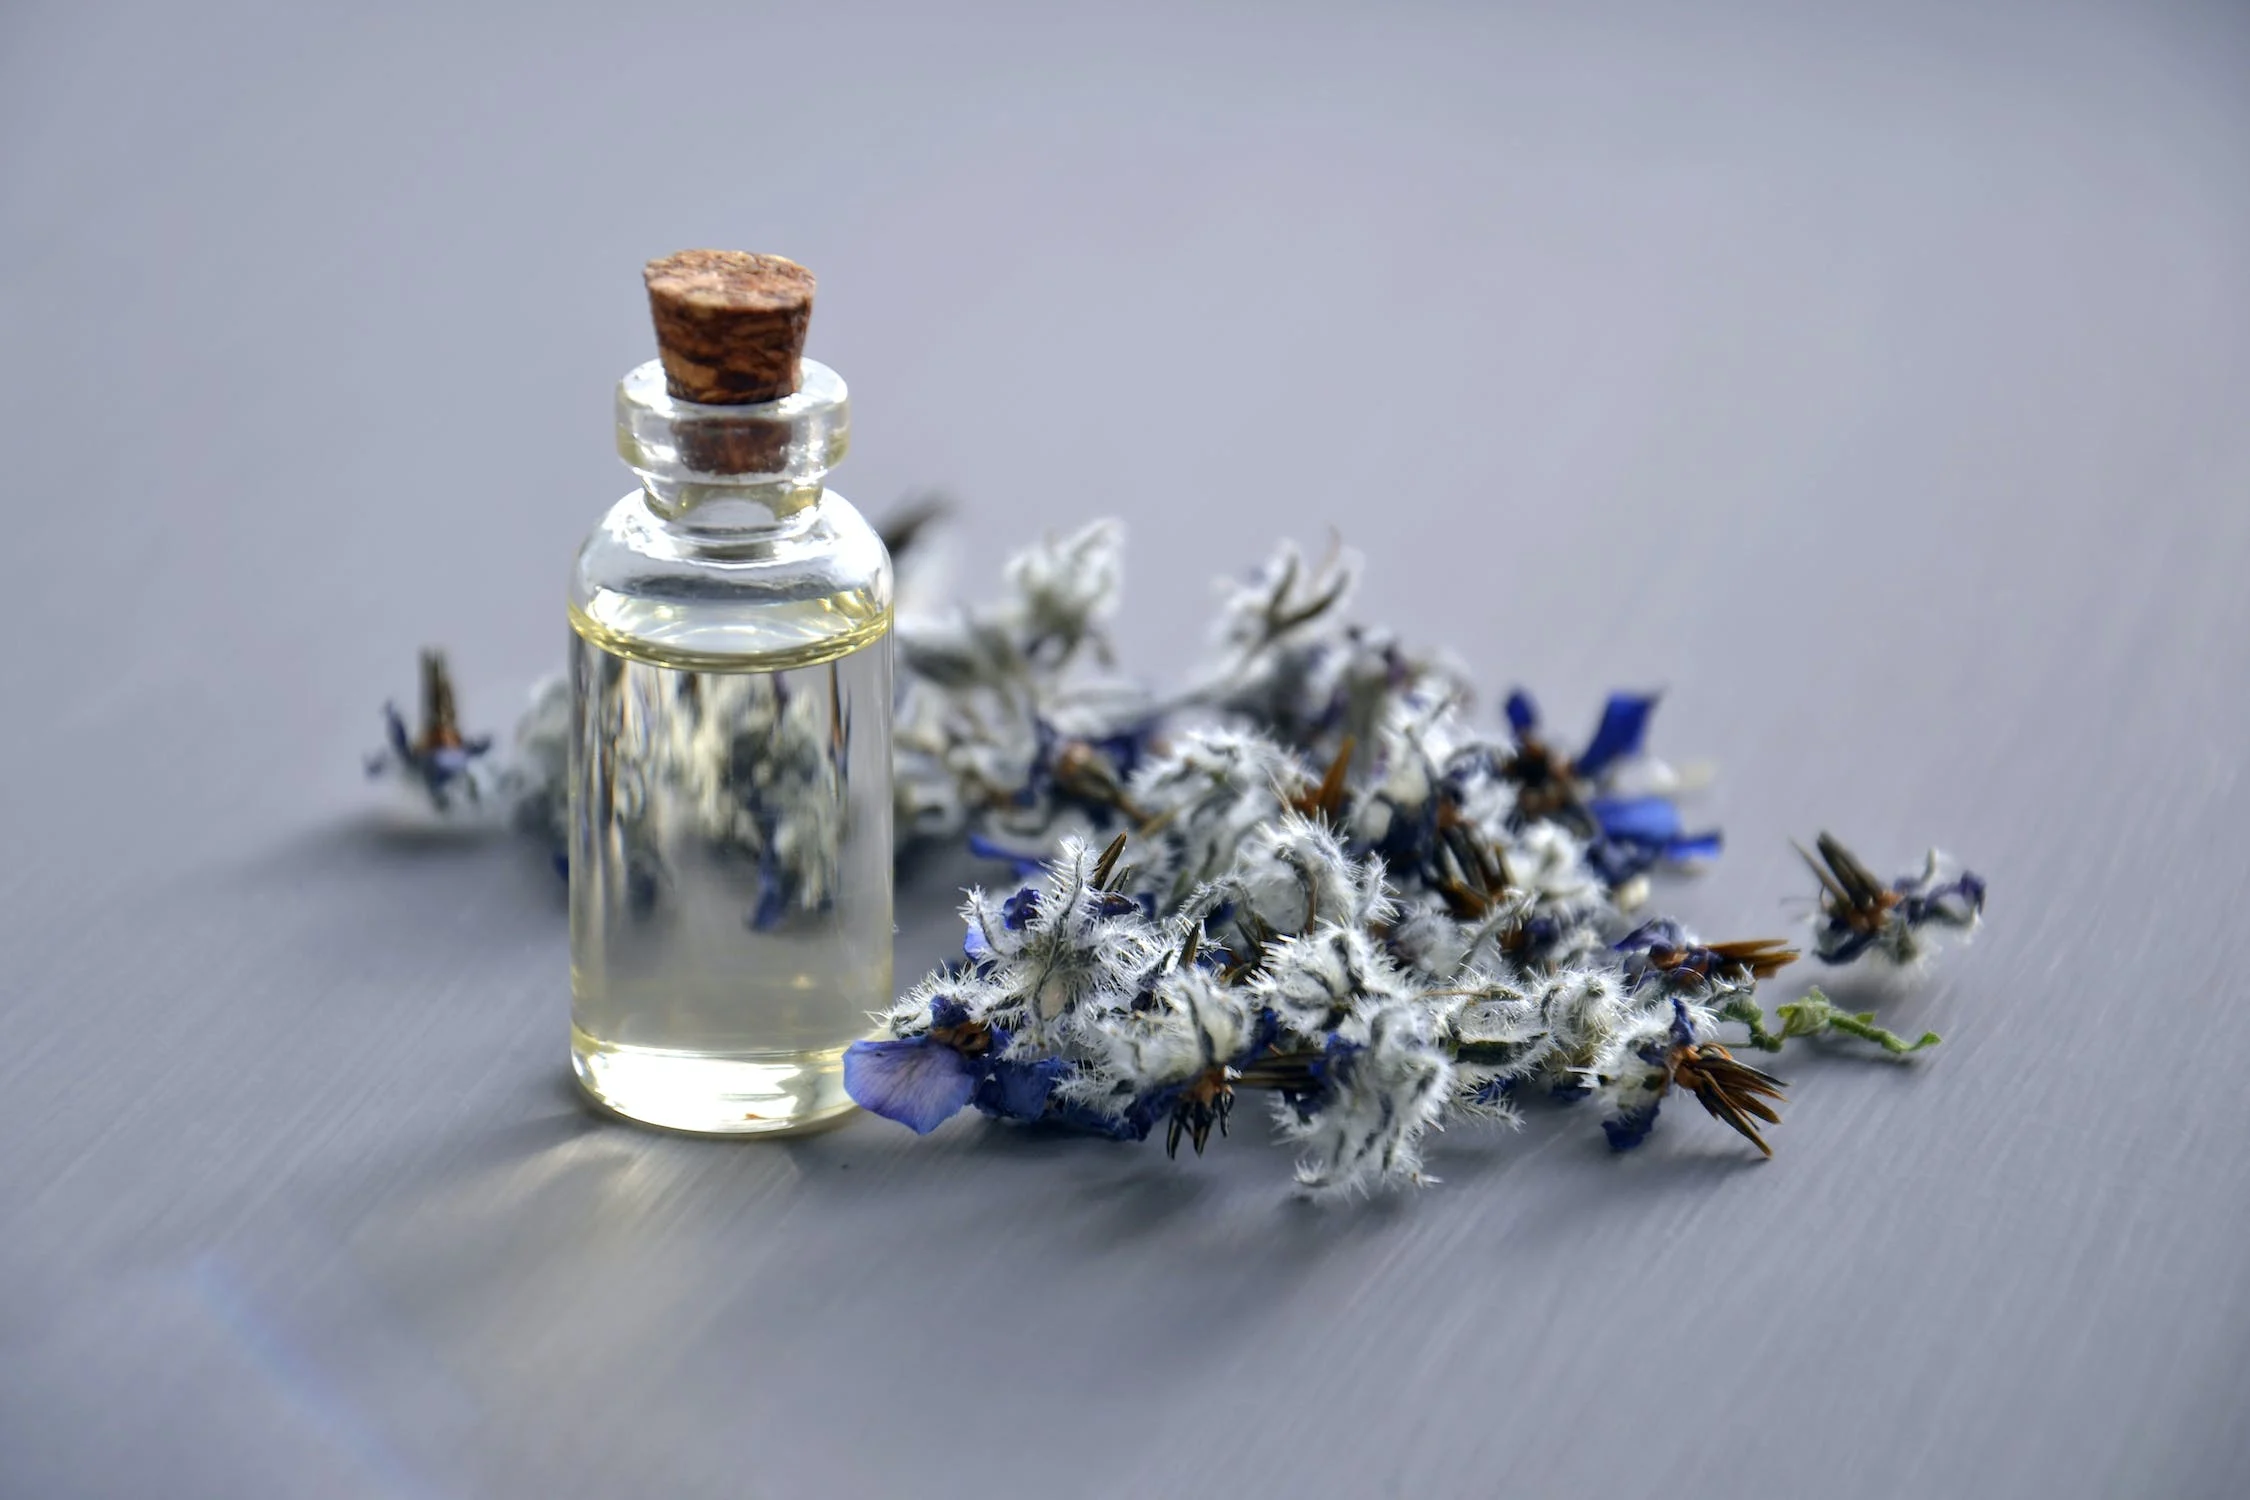 Facts You Need to Know About Kunzea Essential Oil